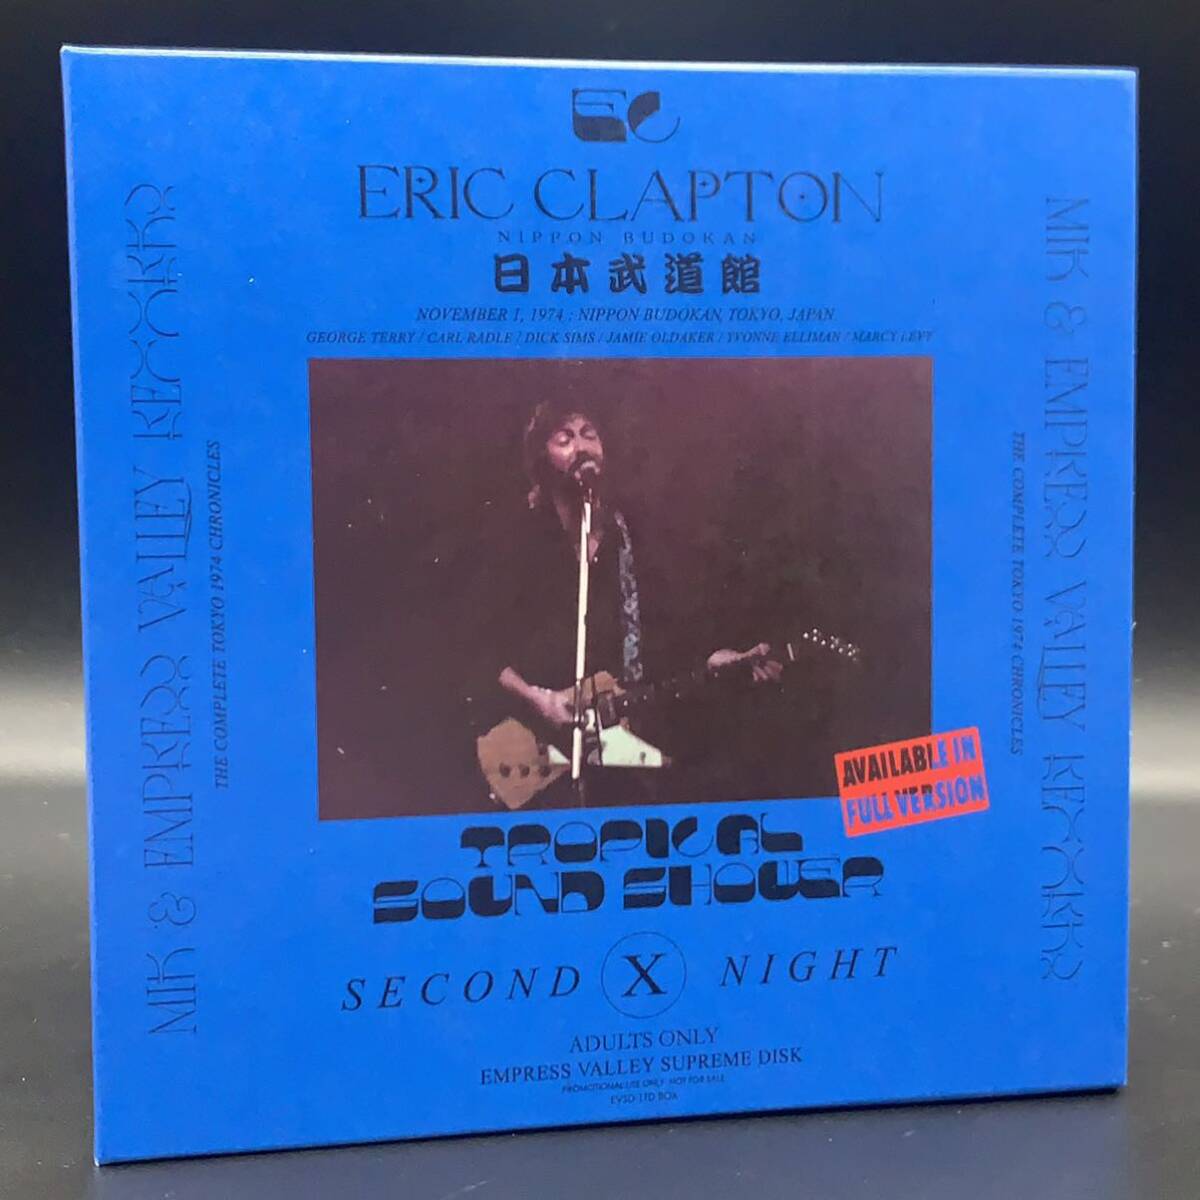 ERIC CLAPTON / TROPICAL SOUND SHOWER「亜熱帯武道館」(6CD BOX with Booklet) 初来日武道館3公演を全て初登場音源で収録！完売品！の画像5